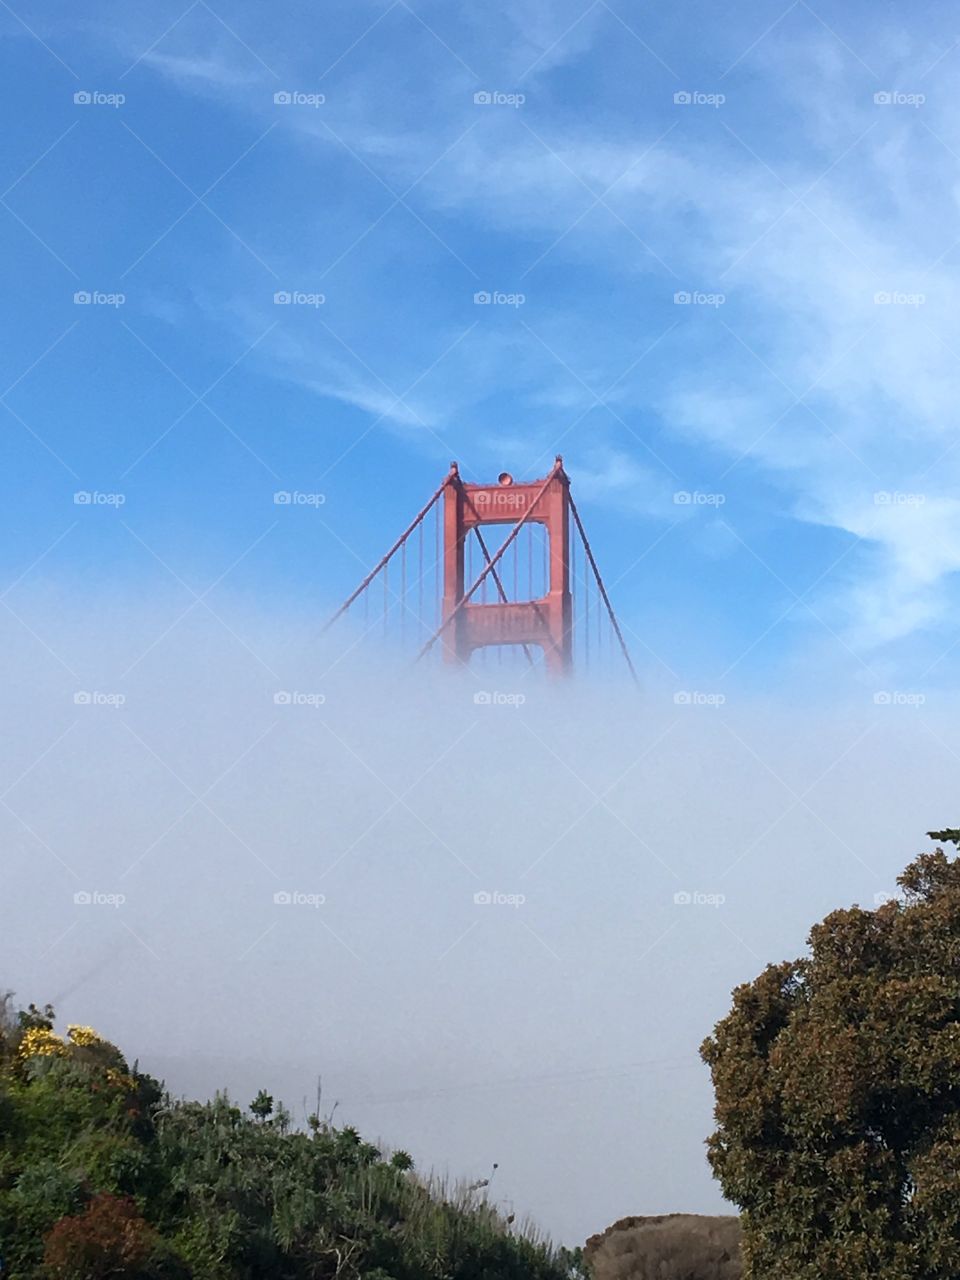 Rising from the Fog